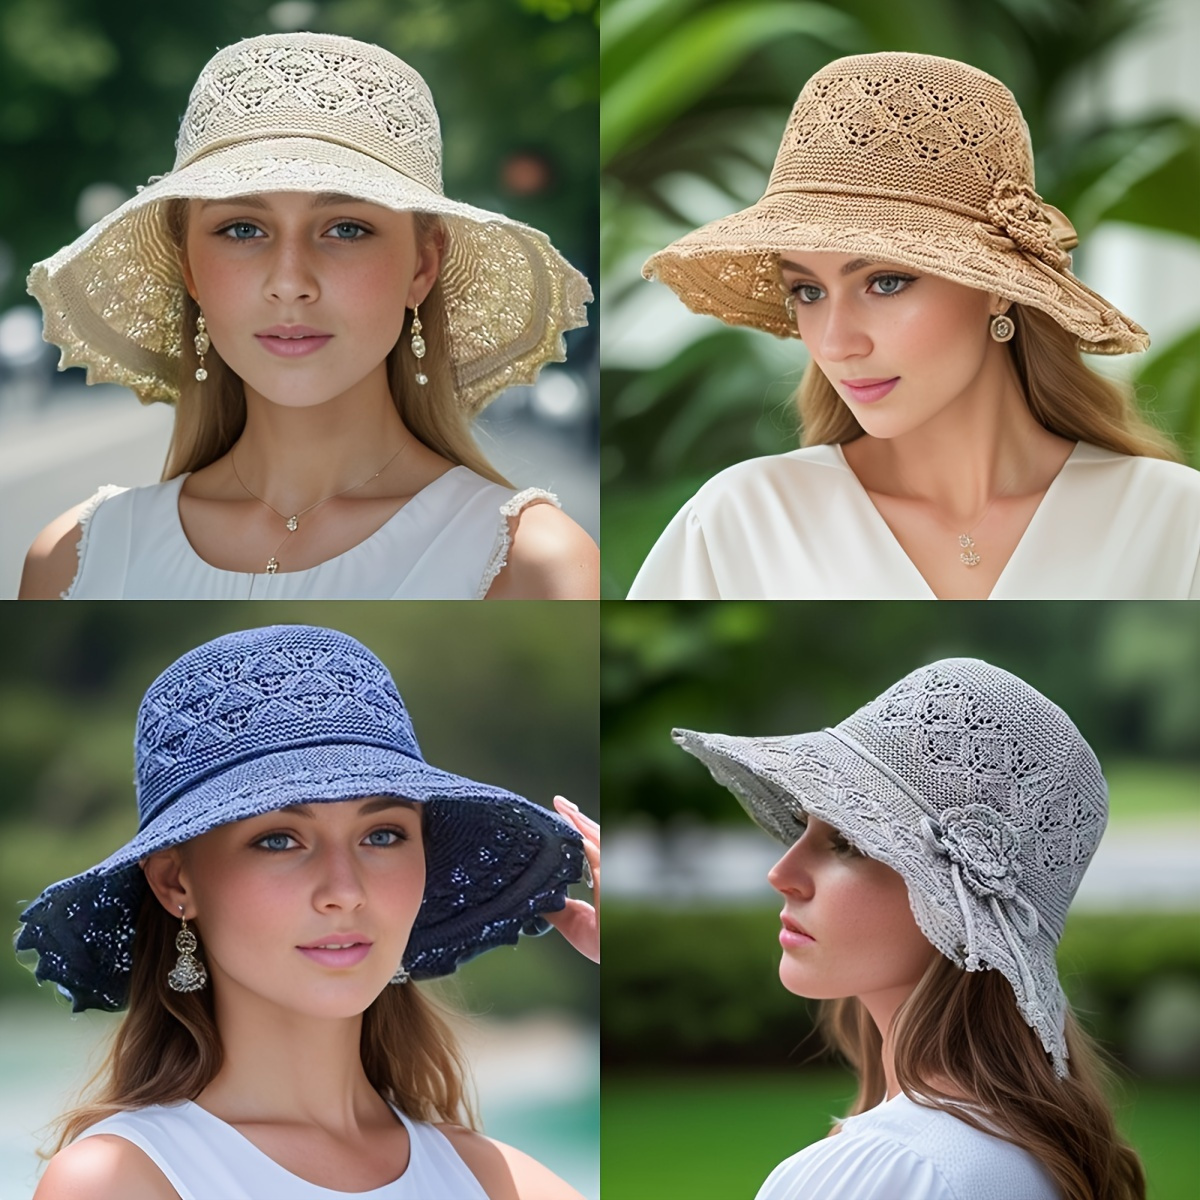 

Elegant Sun Hat For Women - Breathable, Durable & Foldable Wide Brim Beach Hat For Stylish Sun Protection